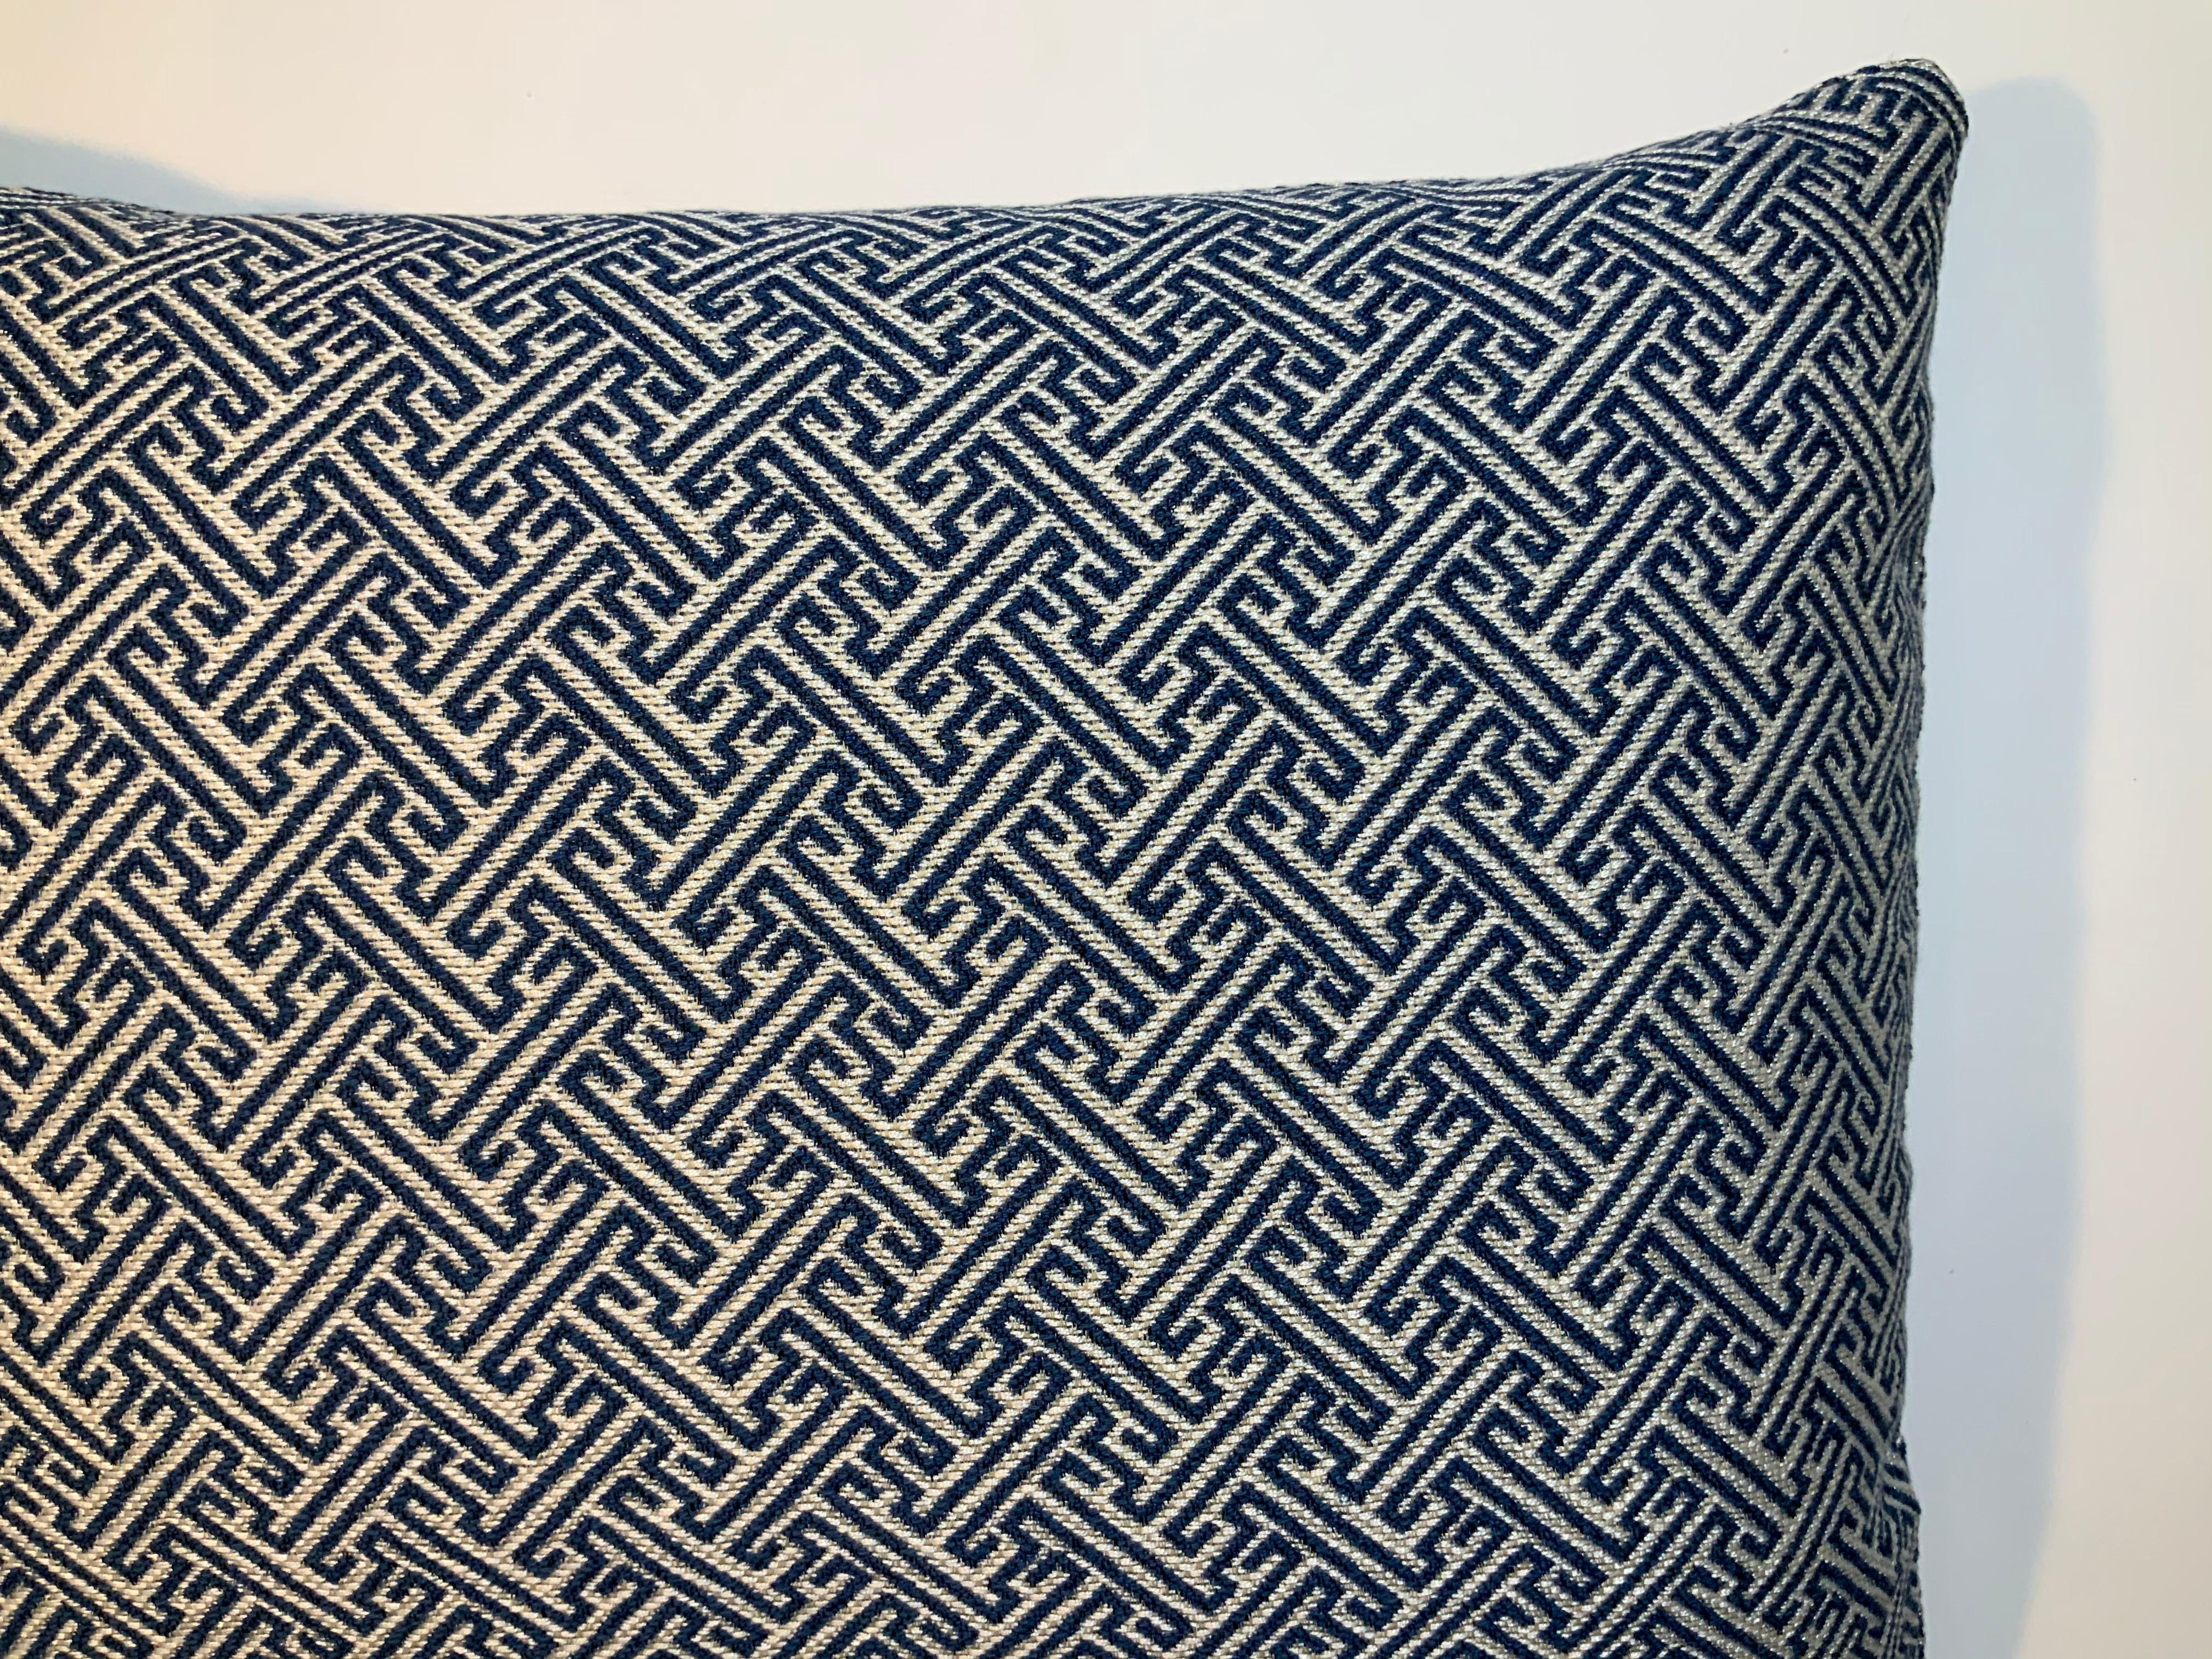 One Geometric Motif Pillow In Good Condition For Sale In Delray Beach, FL